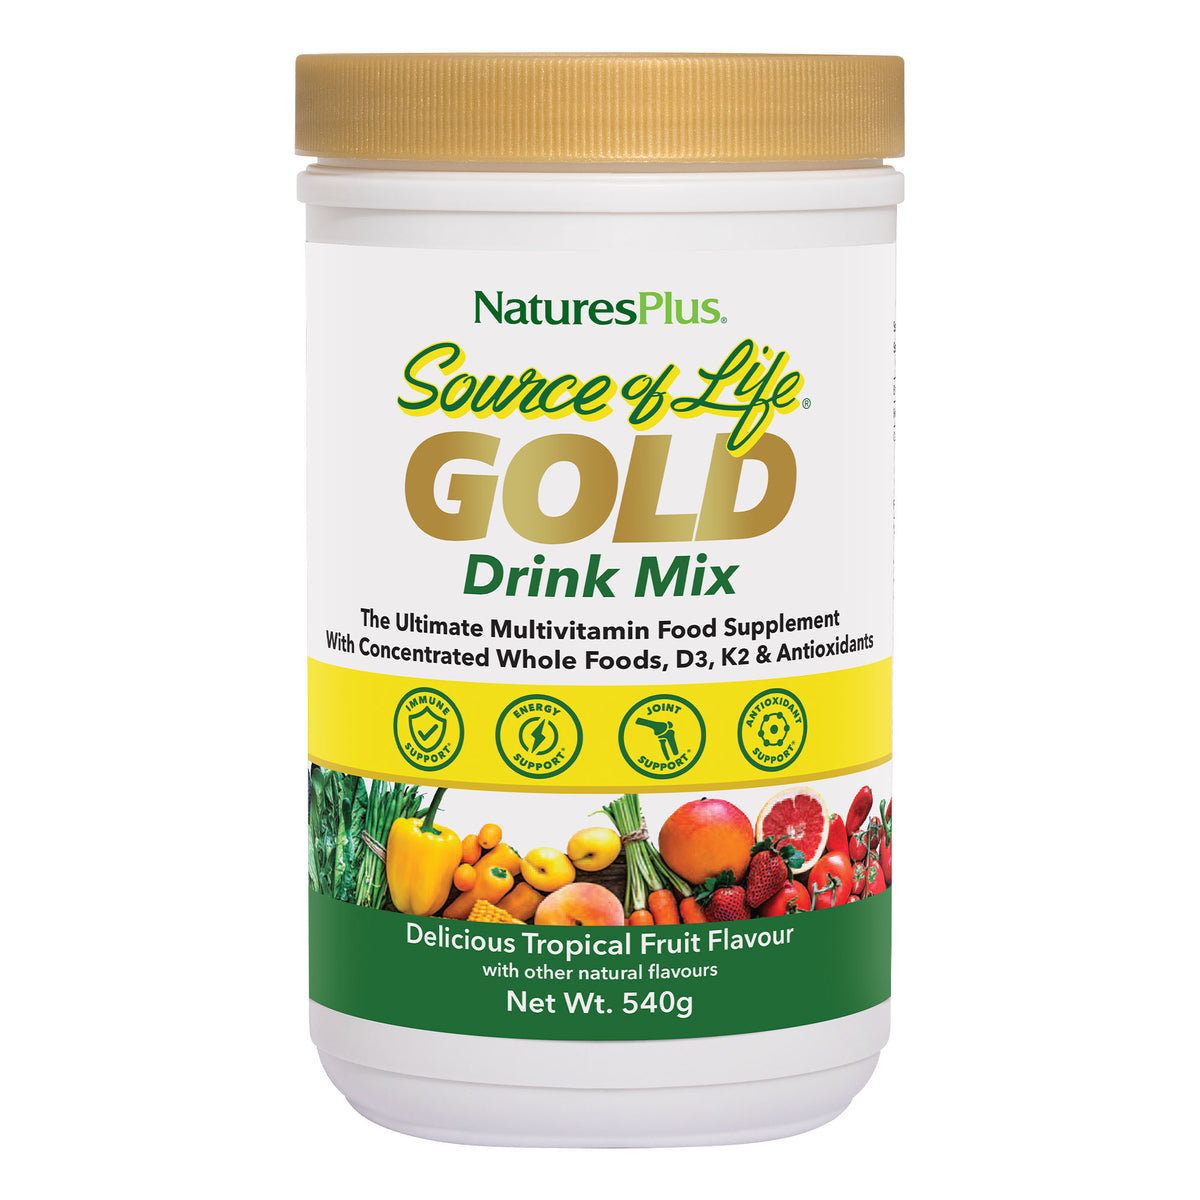 product image of Source of Life® GOLD Drink Mix containing Source of Life® GOLD Drink Mix